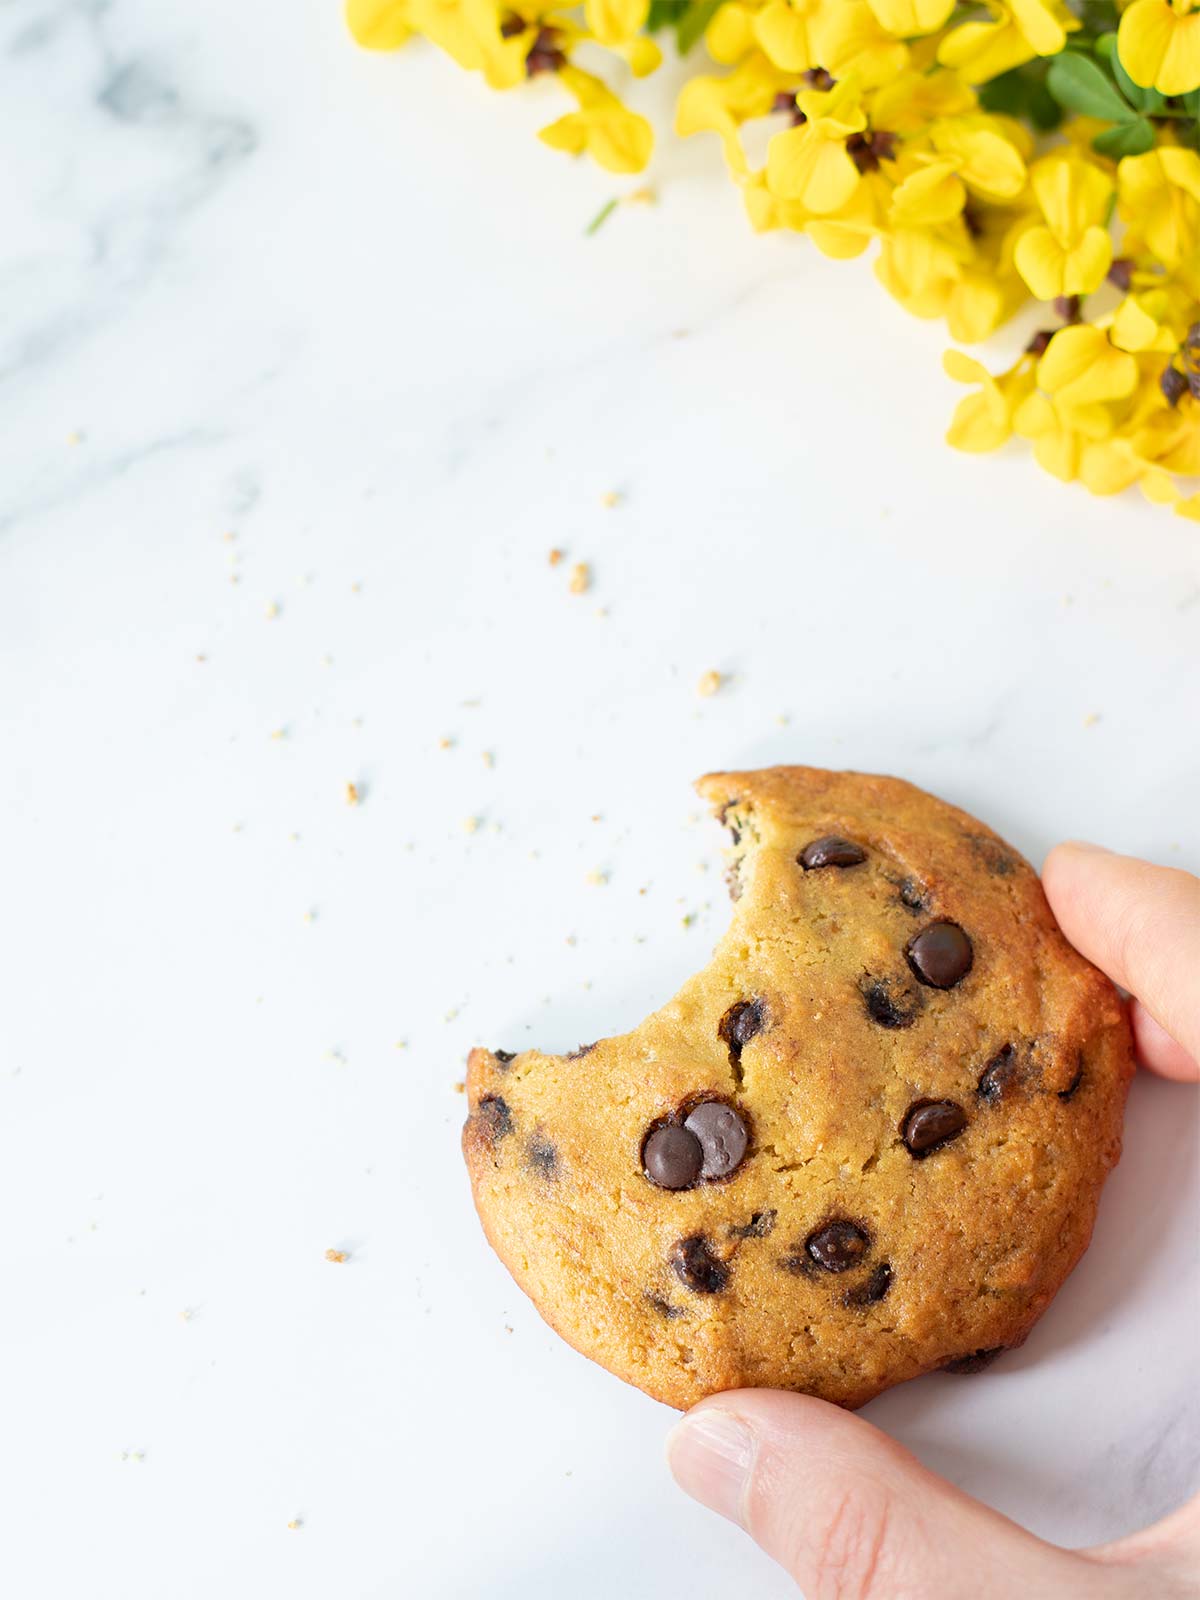 Female hand is holding a chickpea flour chocolate chip cookie on white table with crumbs and bright yellow flowers